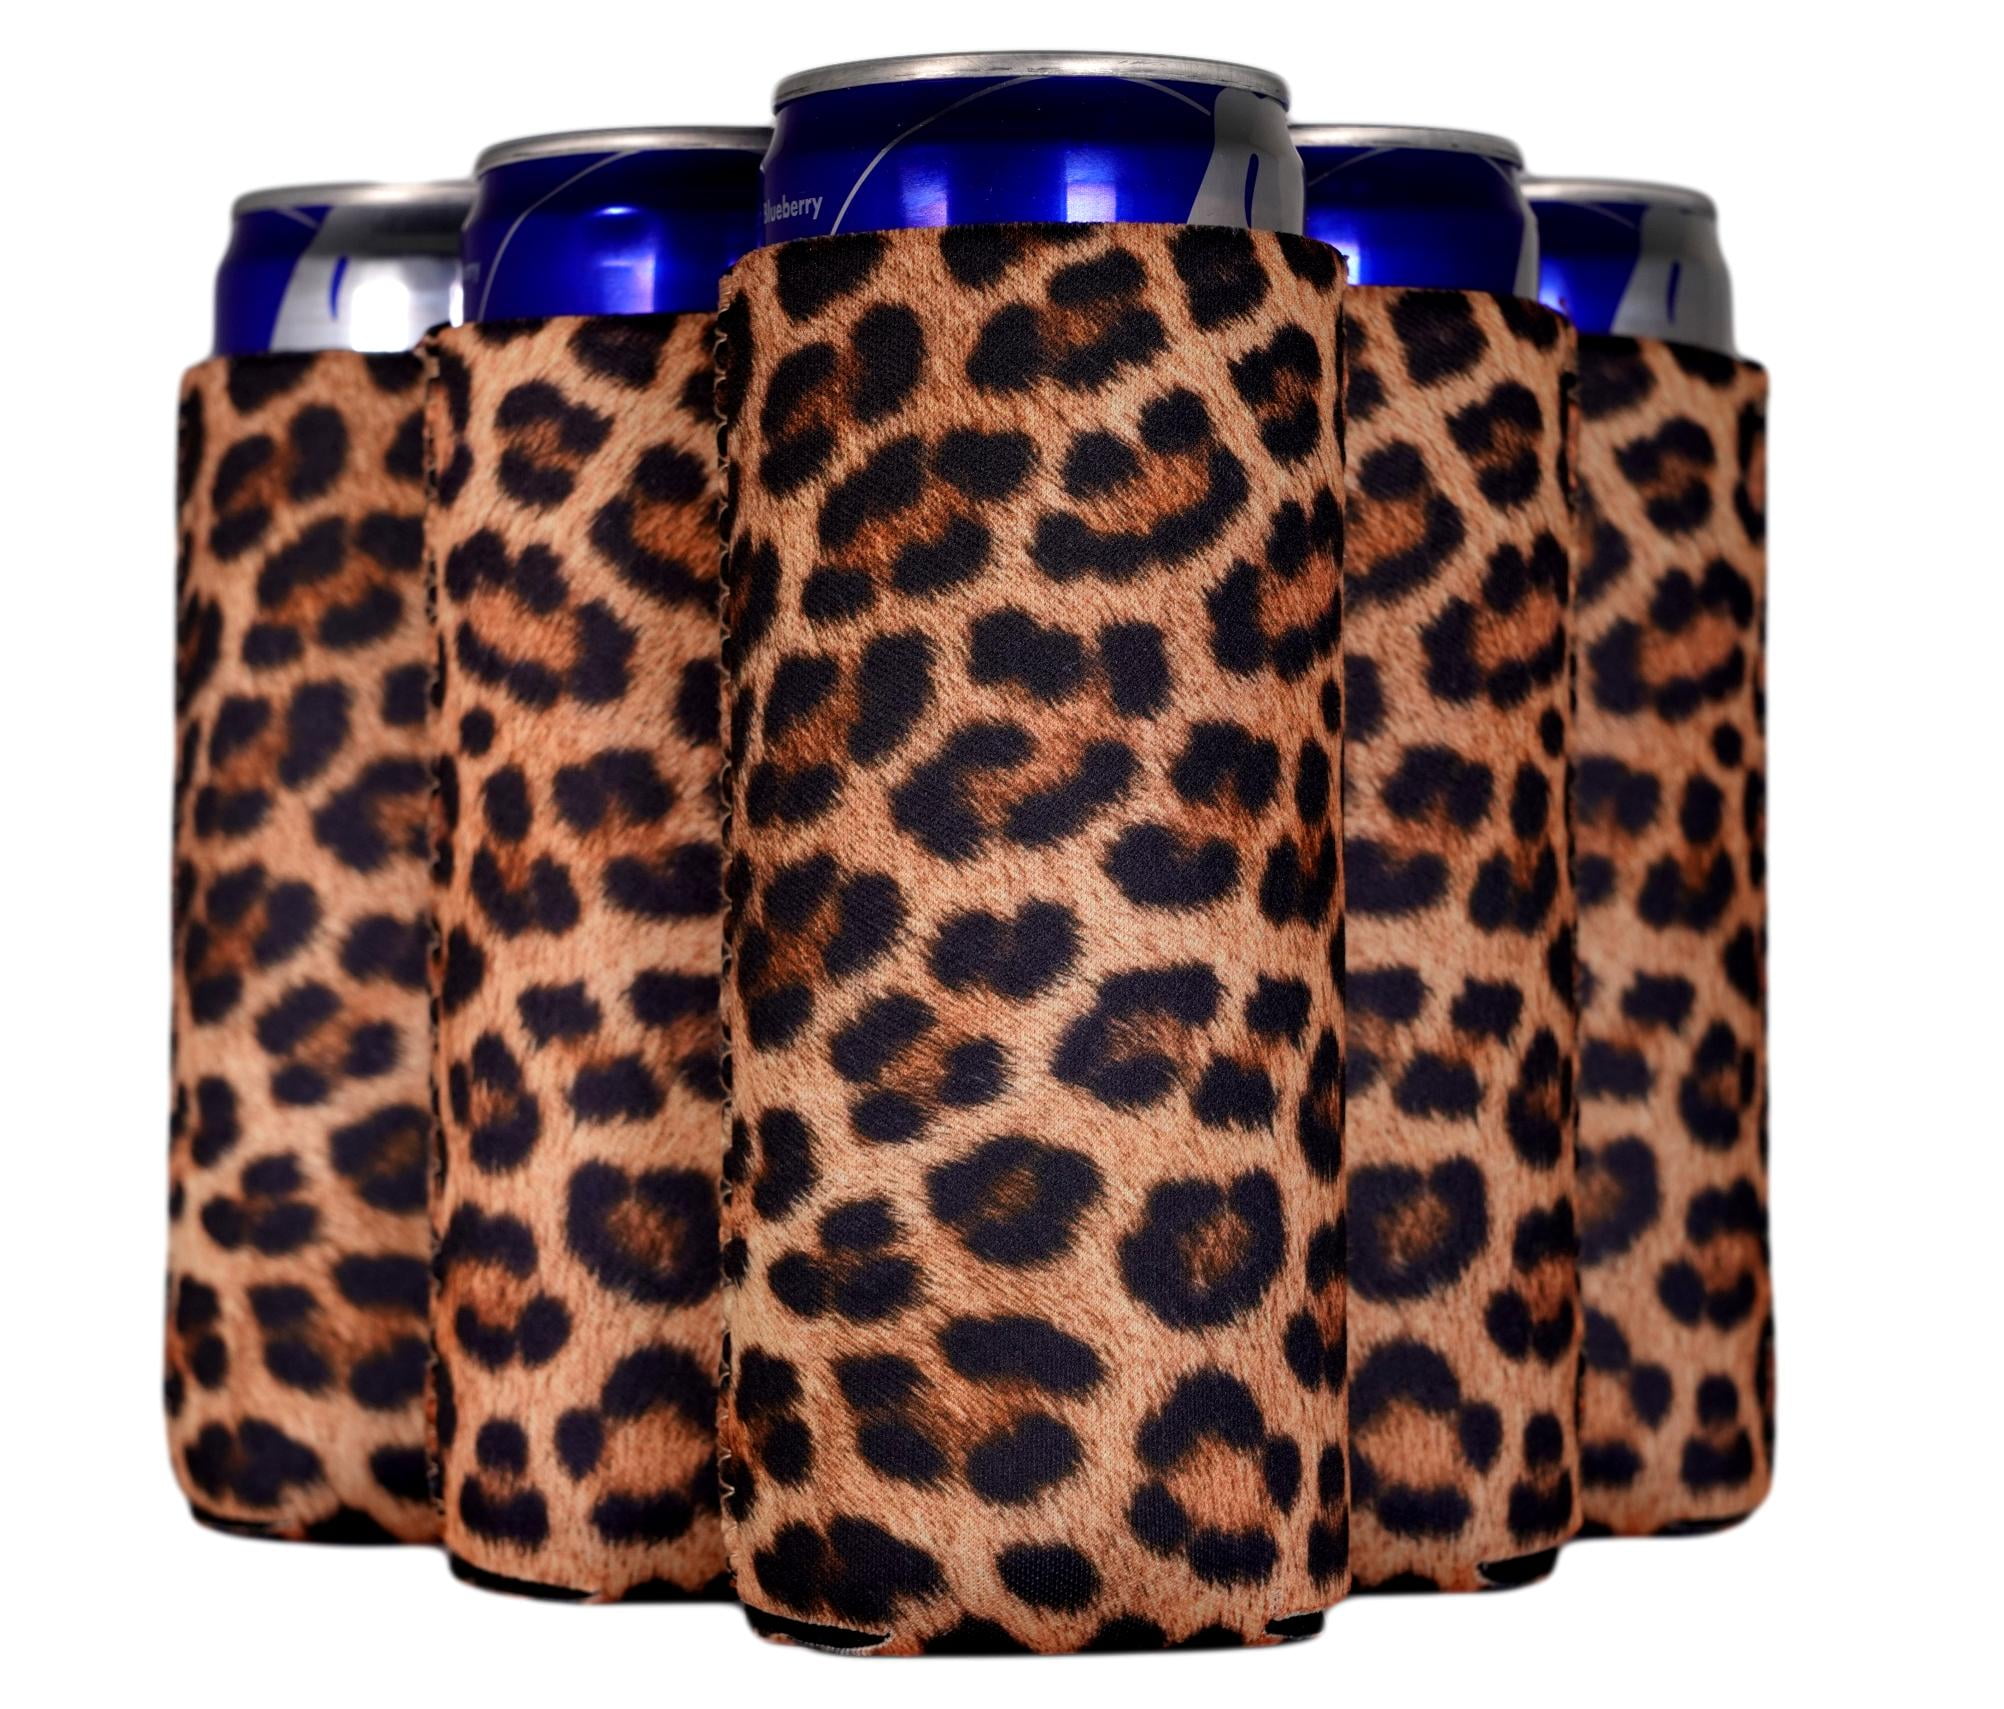 Slim Can Cooler by Alaska Wild and Free (8 Designs) – Montana Gift Corral